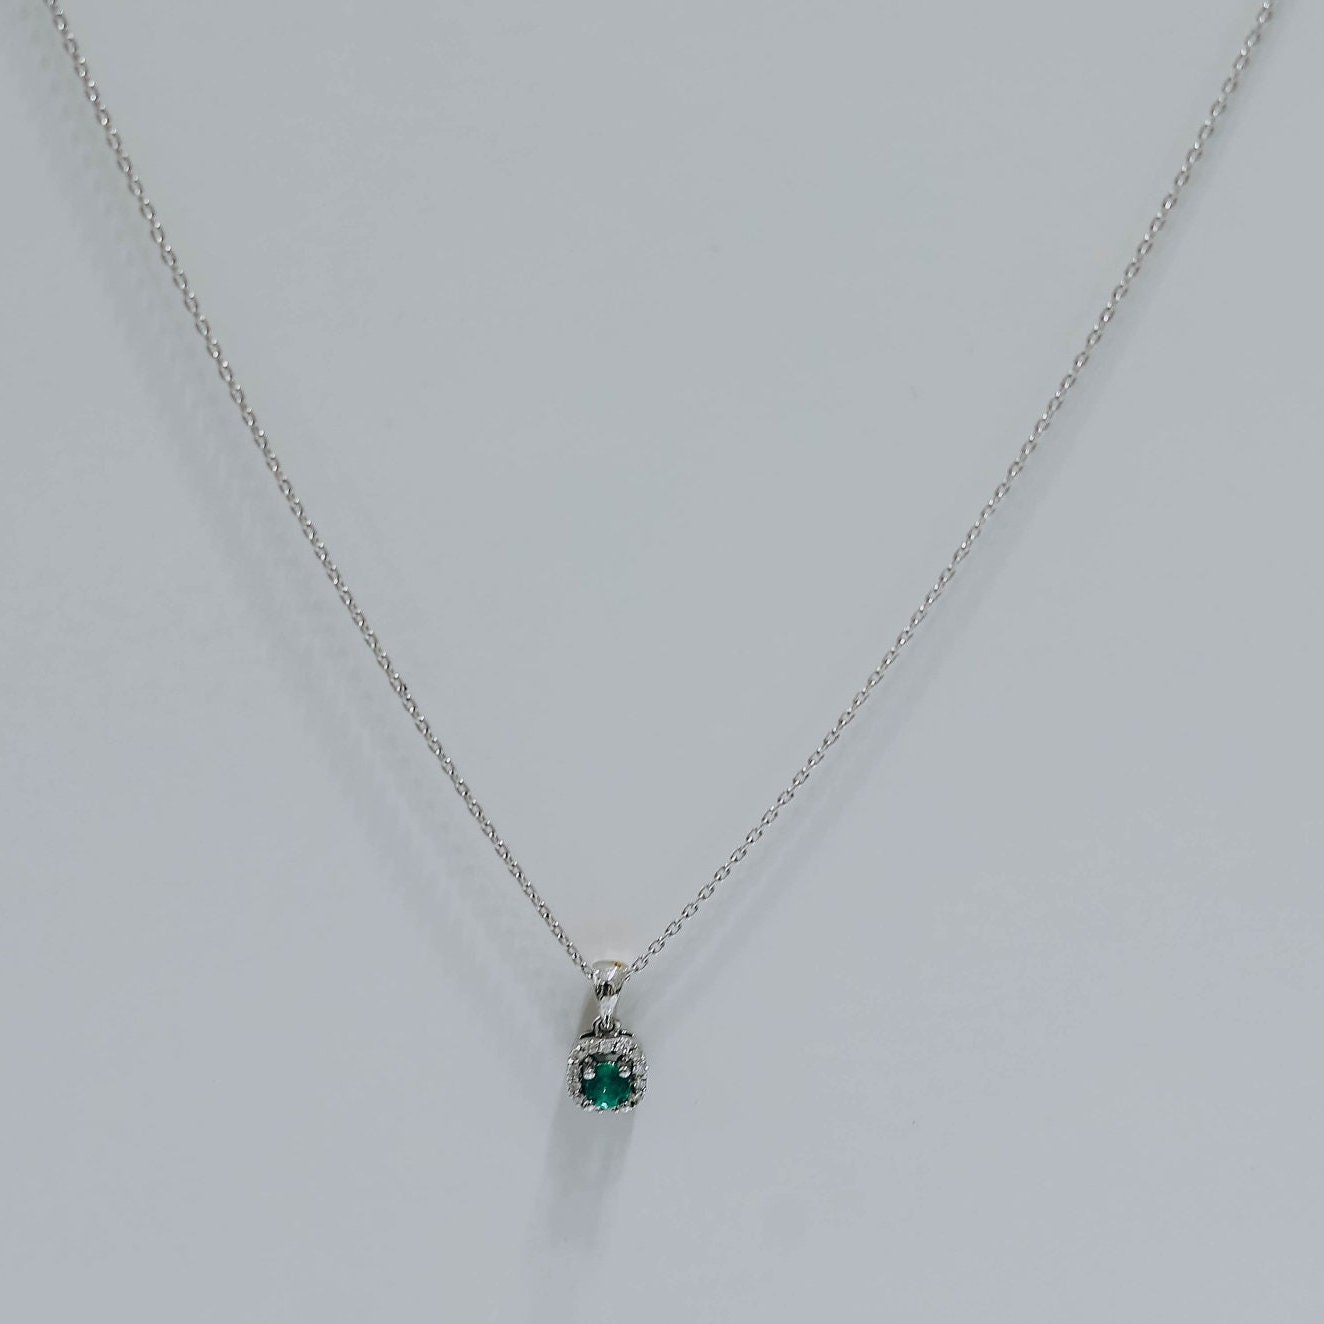 Emerald Necklace / Genuine Emerald Necklace in 18k Gold / - Etsy